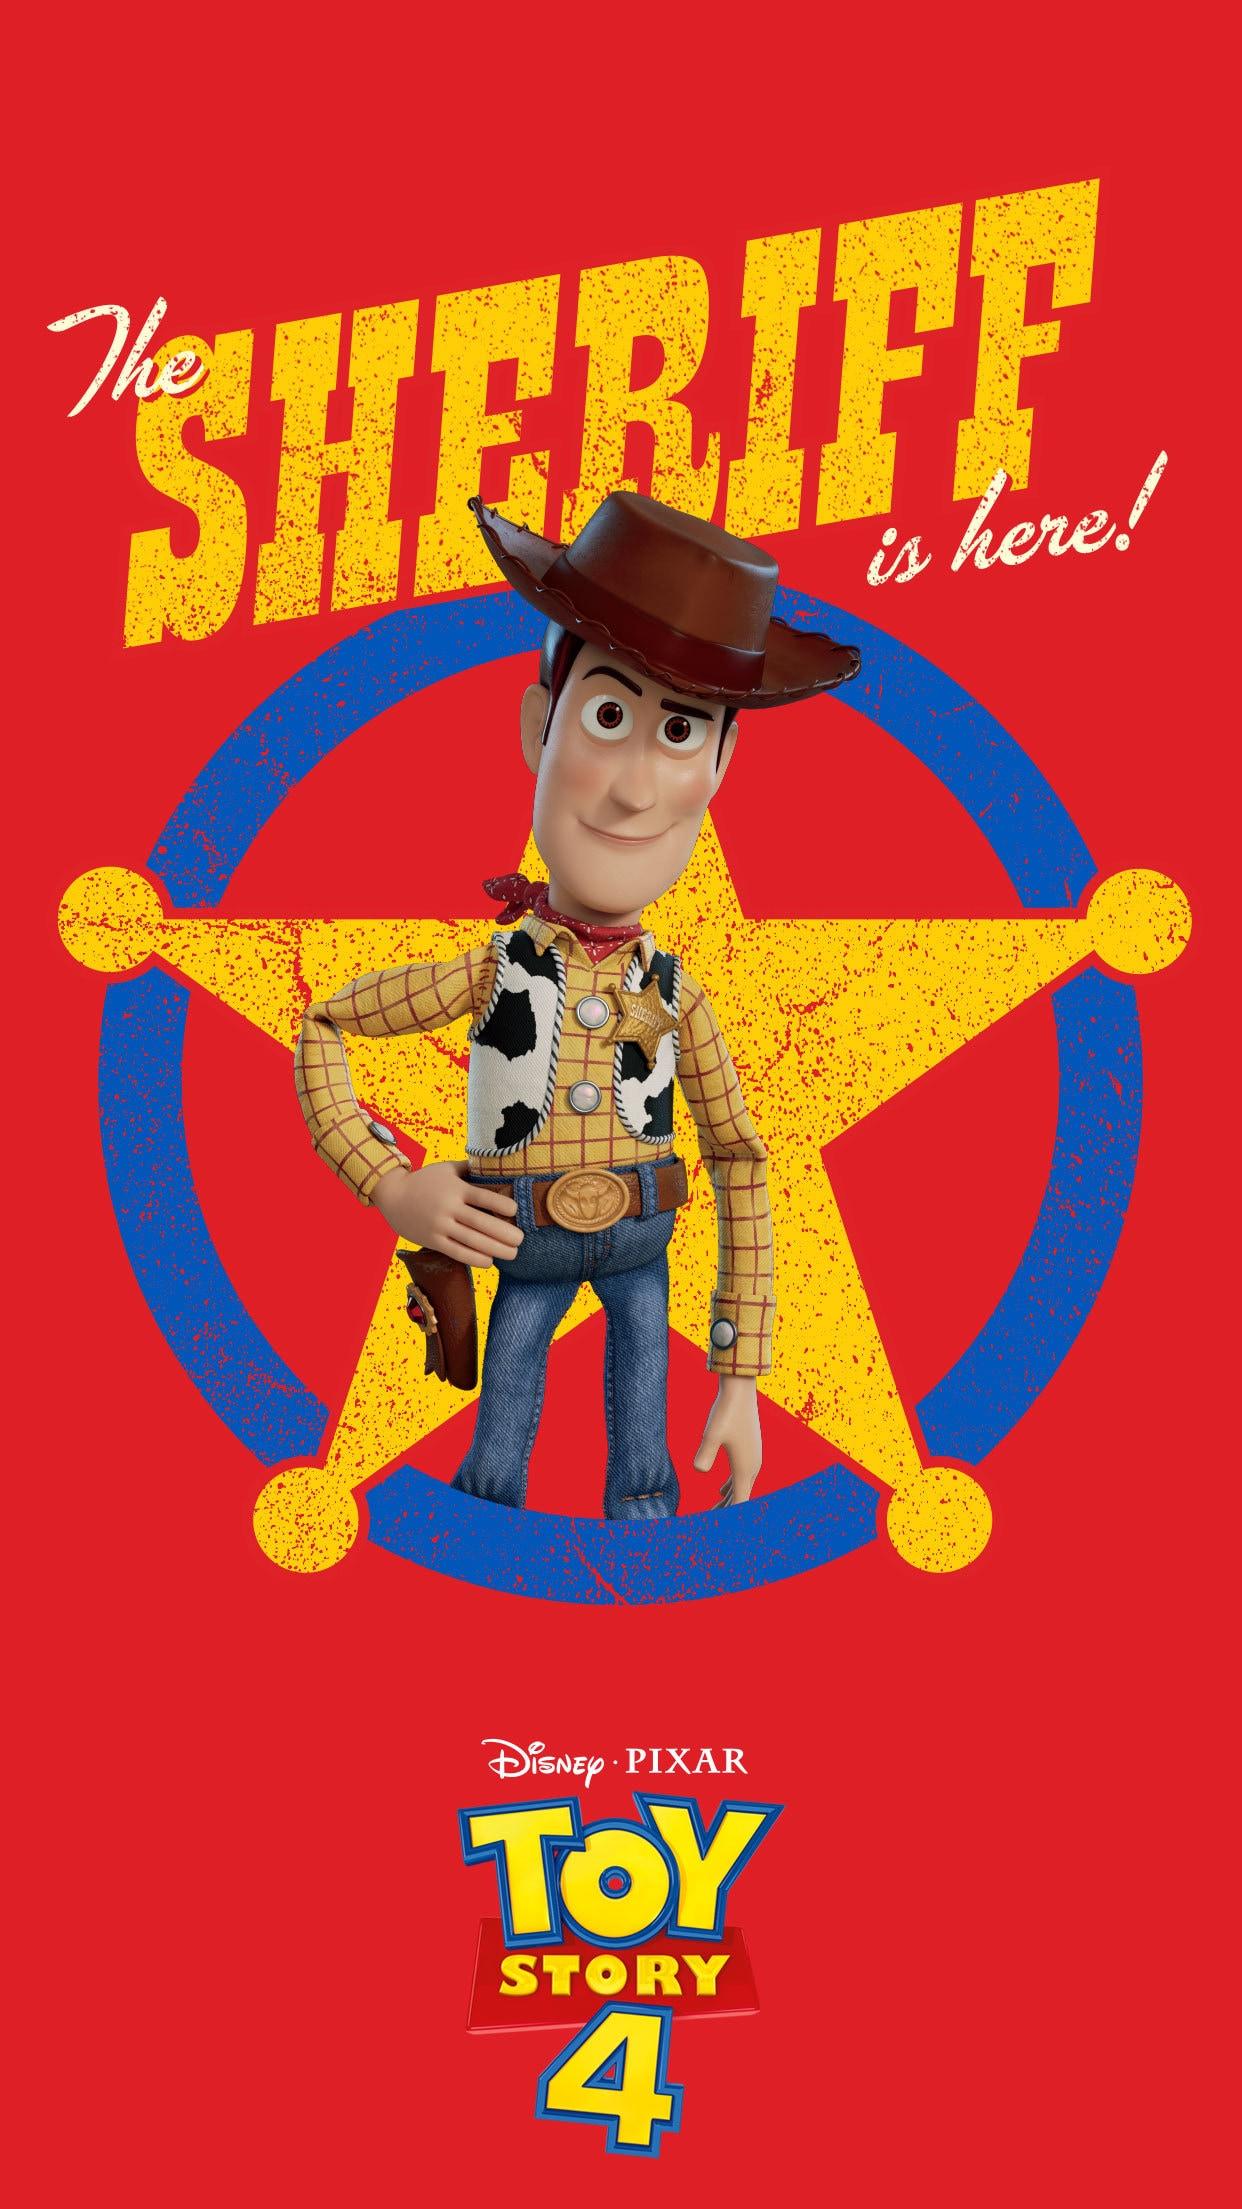 Toy Story 2019 Movie Poster Wallpapers